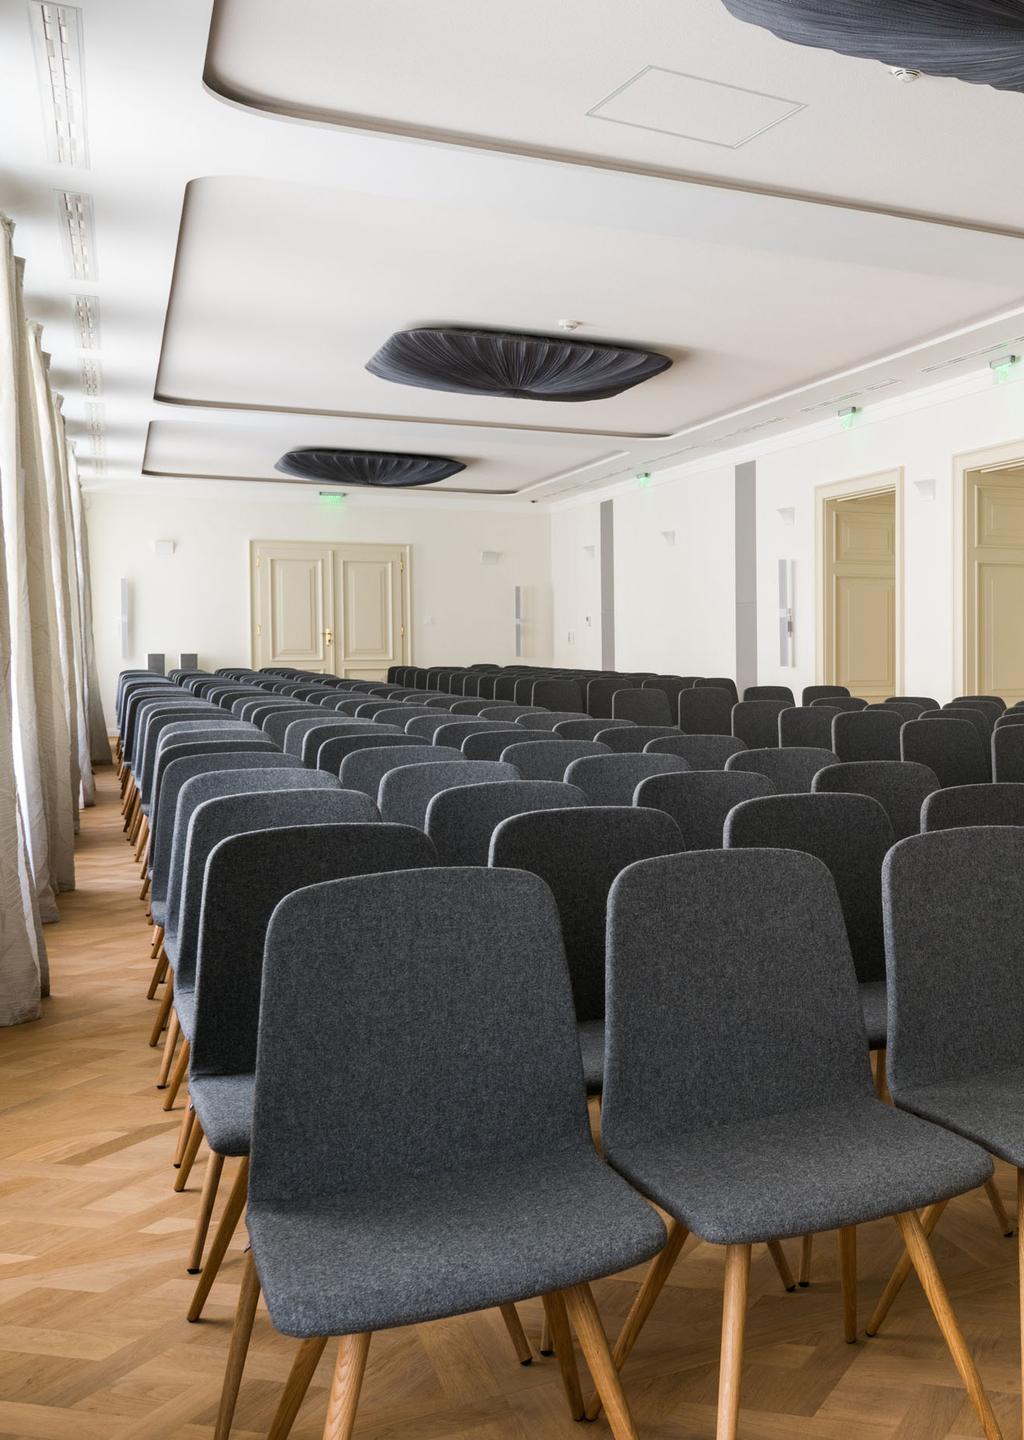 Mozart s Hall capacity and seating options: Cinema 123 persons School 96